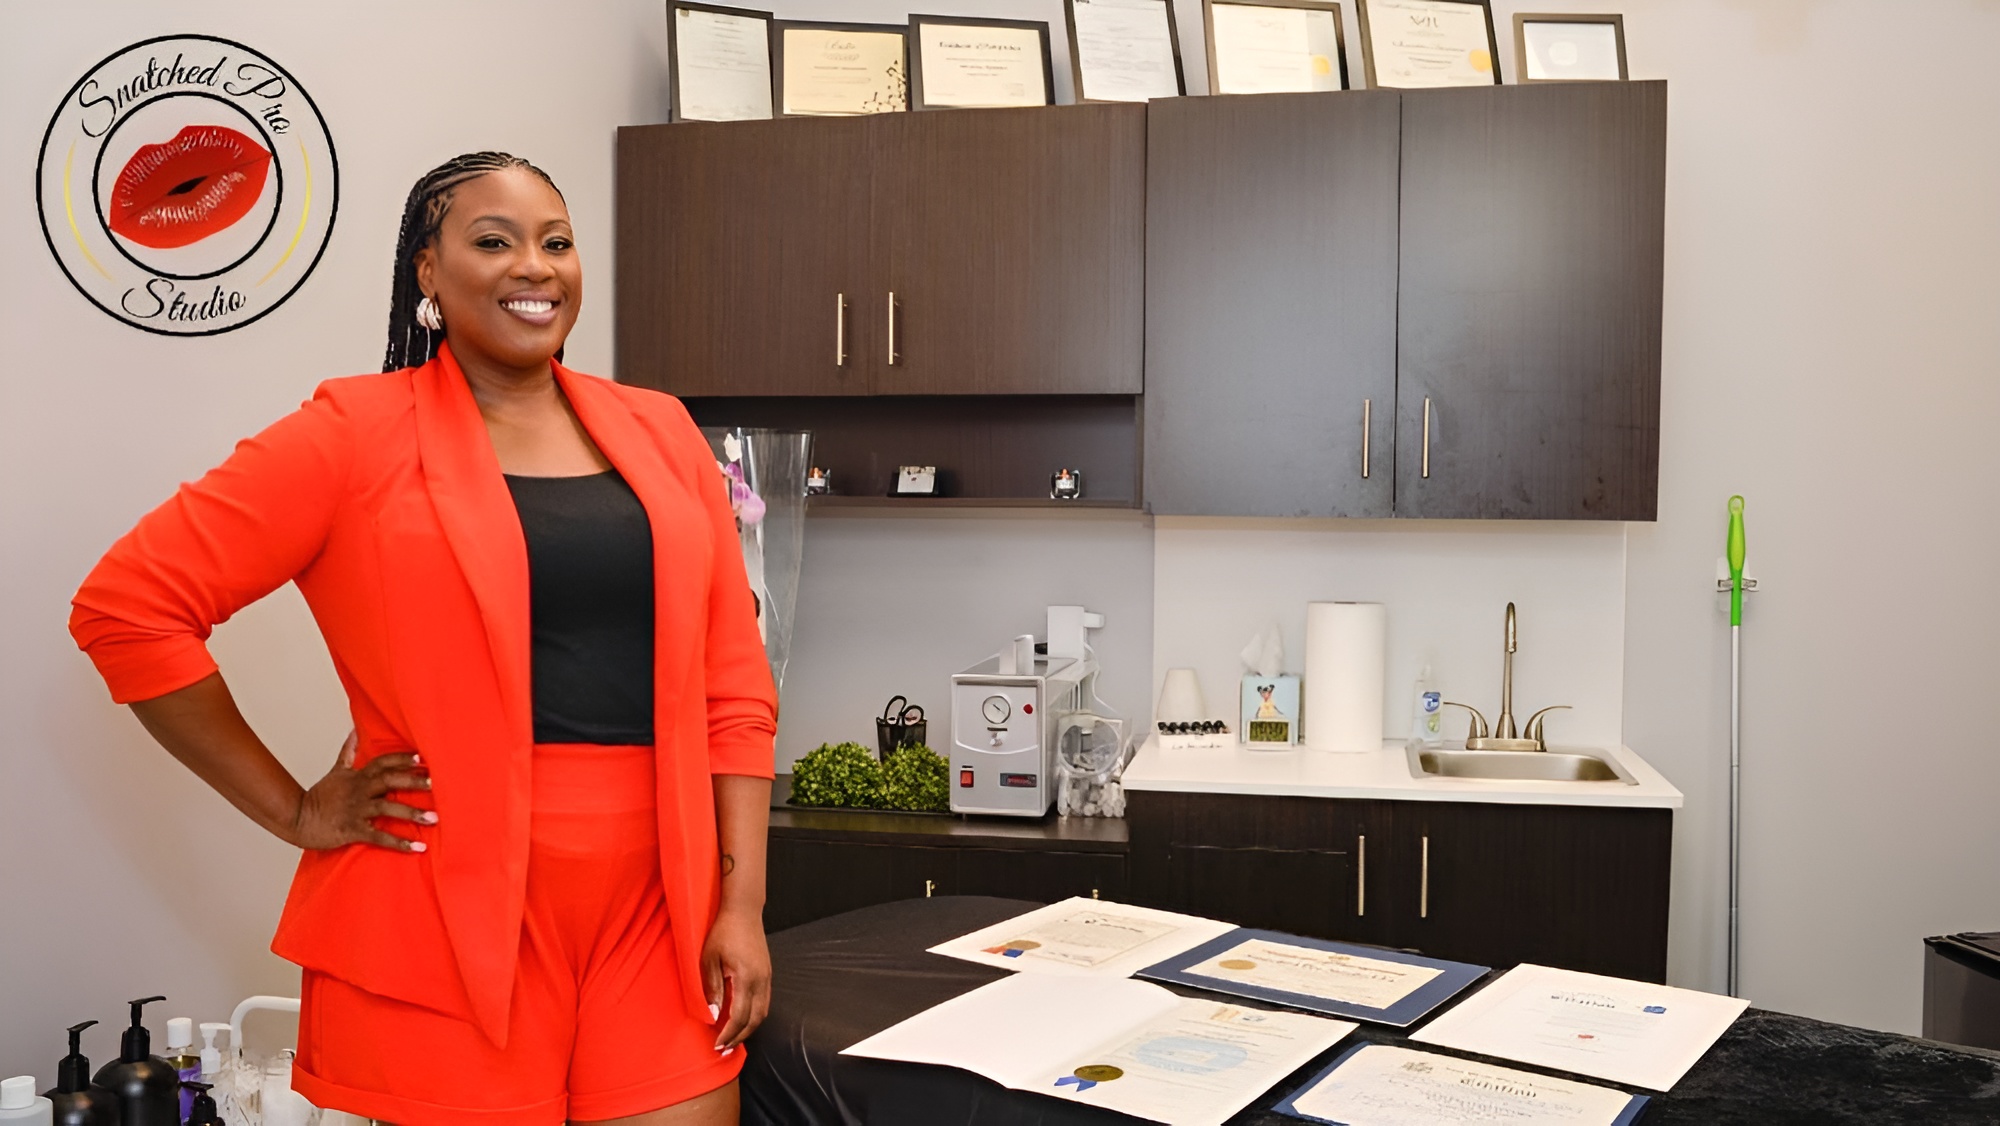 Meet the esthetician who went from doing beauty services on her front stoop to running her own business